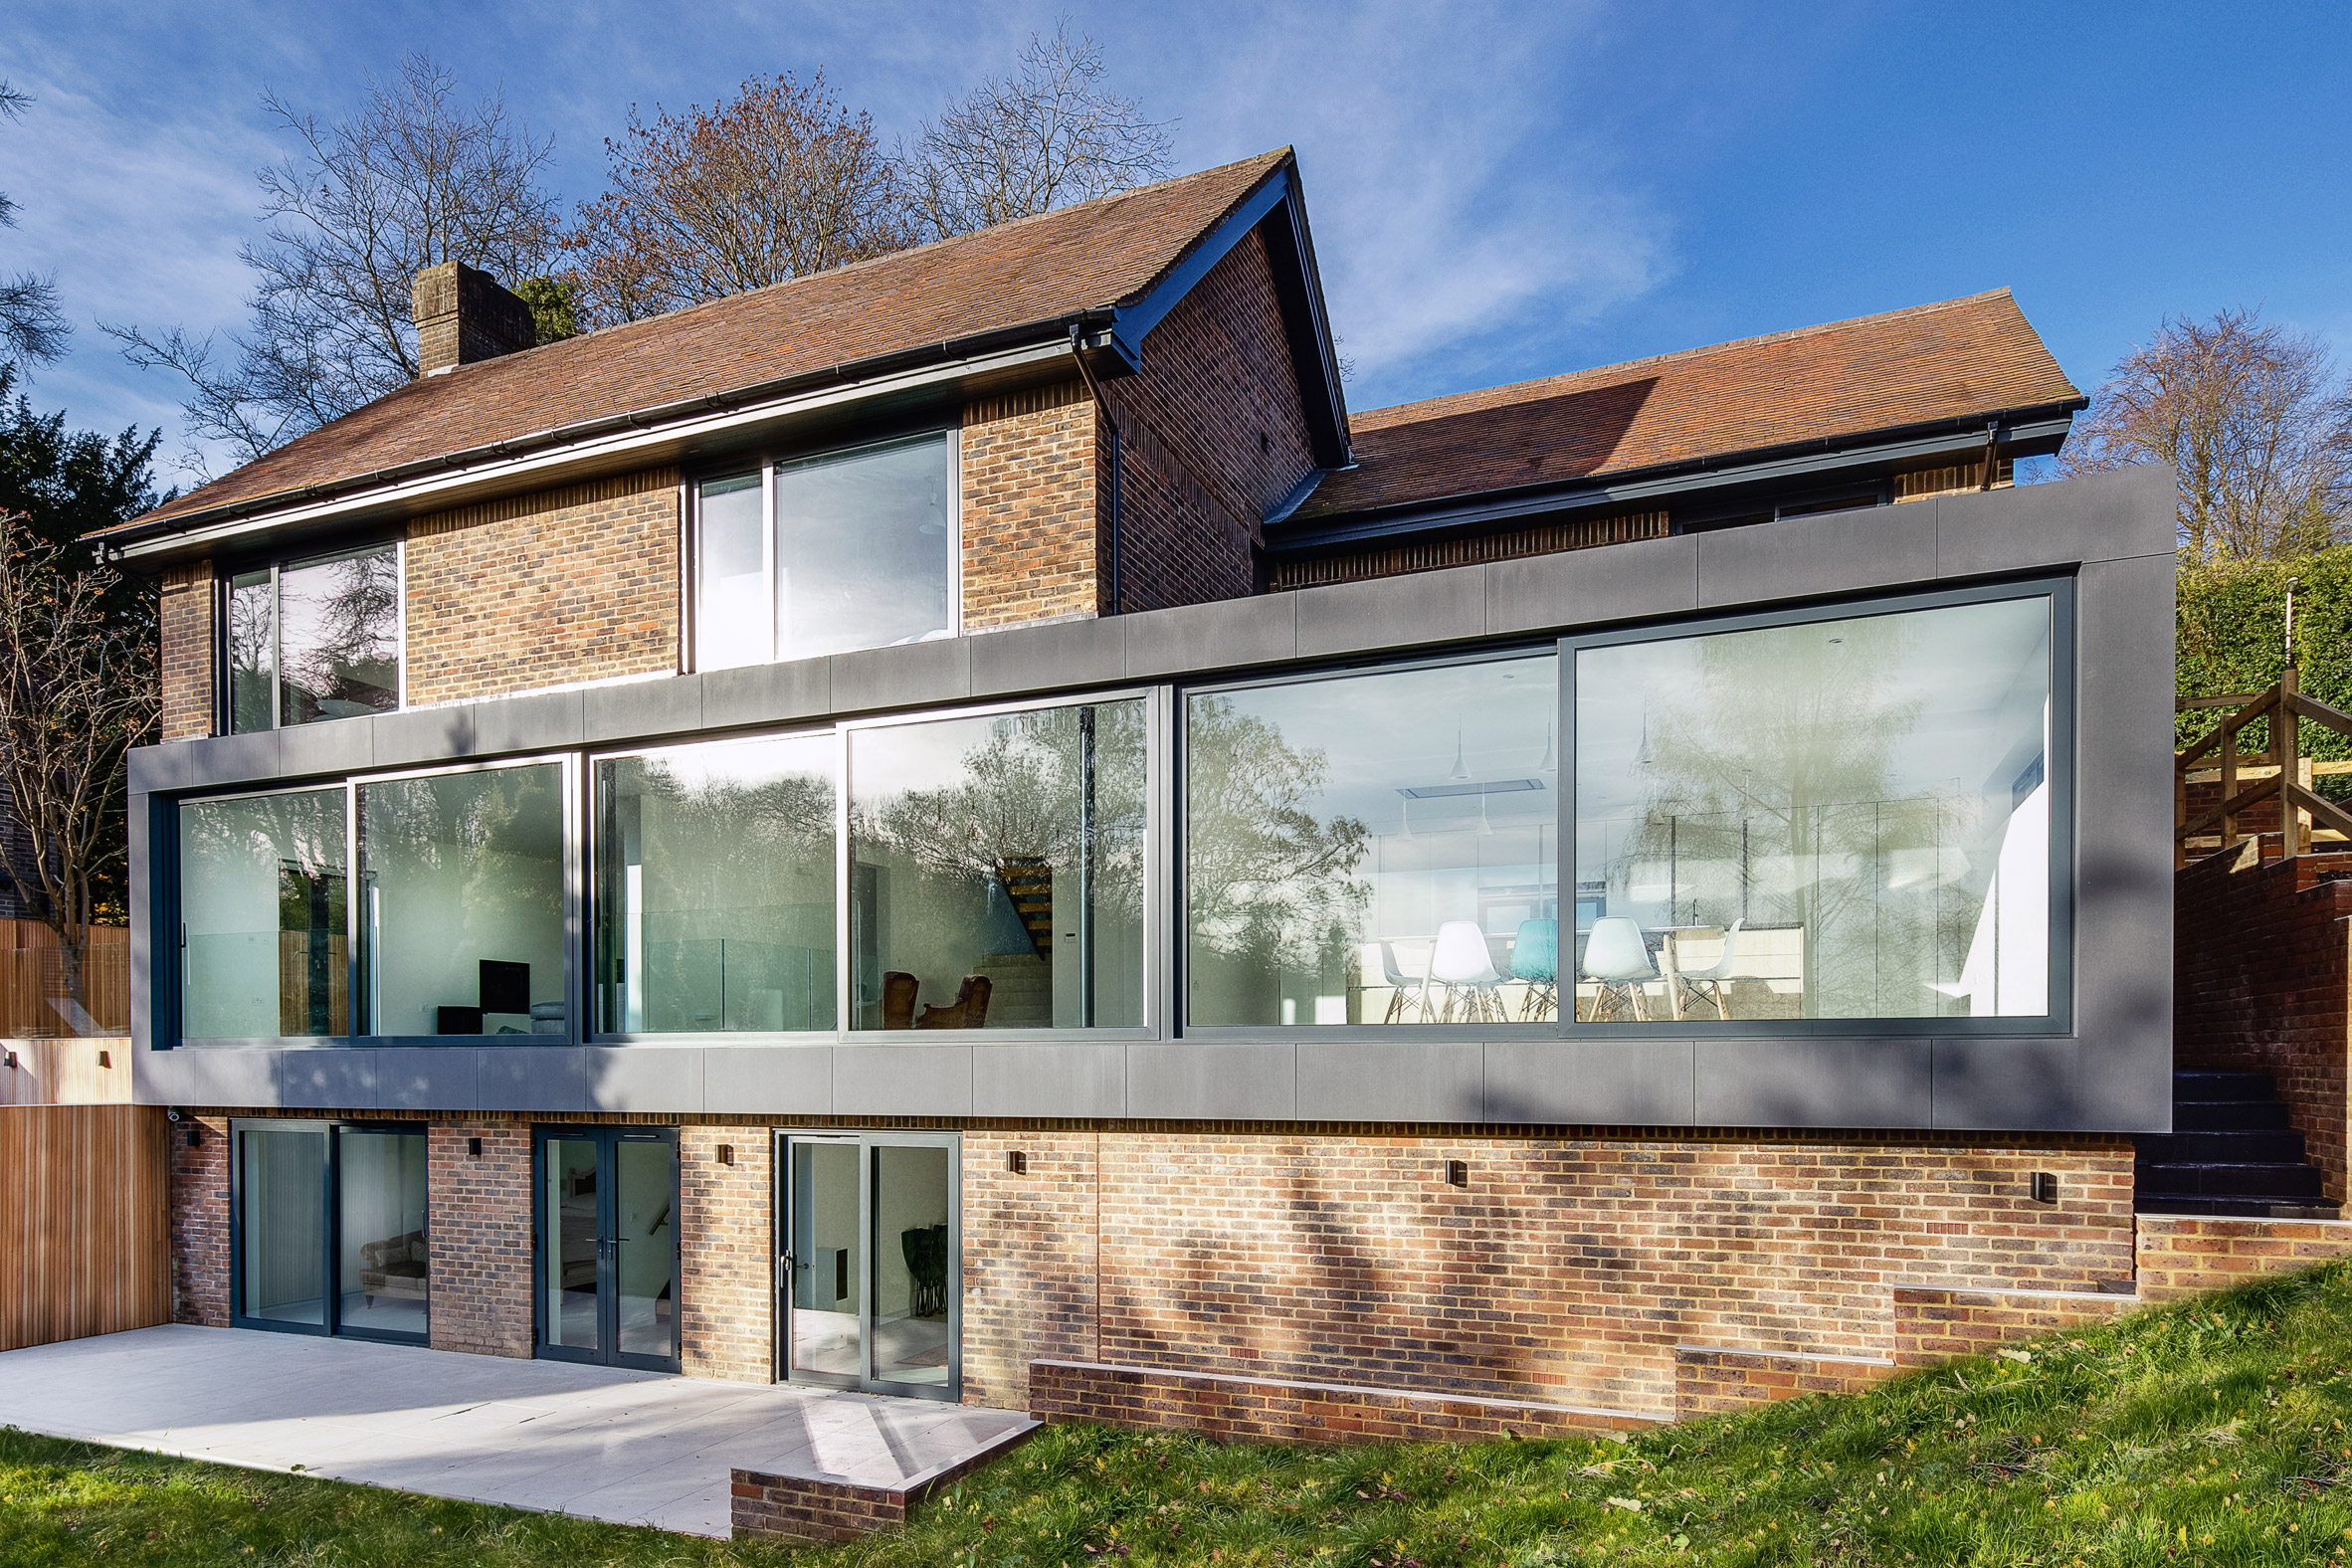 AR Design Studio adds glazed extensions to 1970s house in southern England